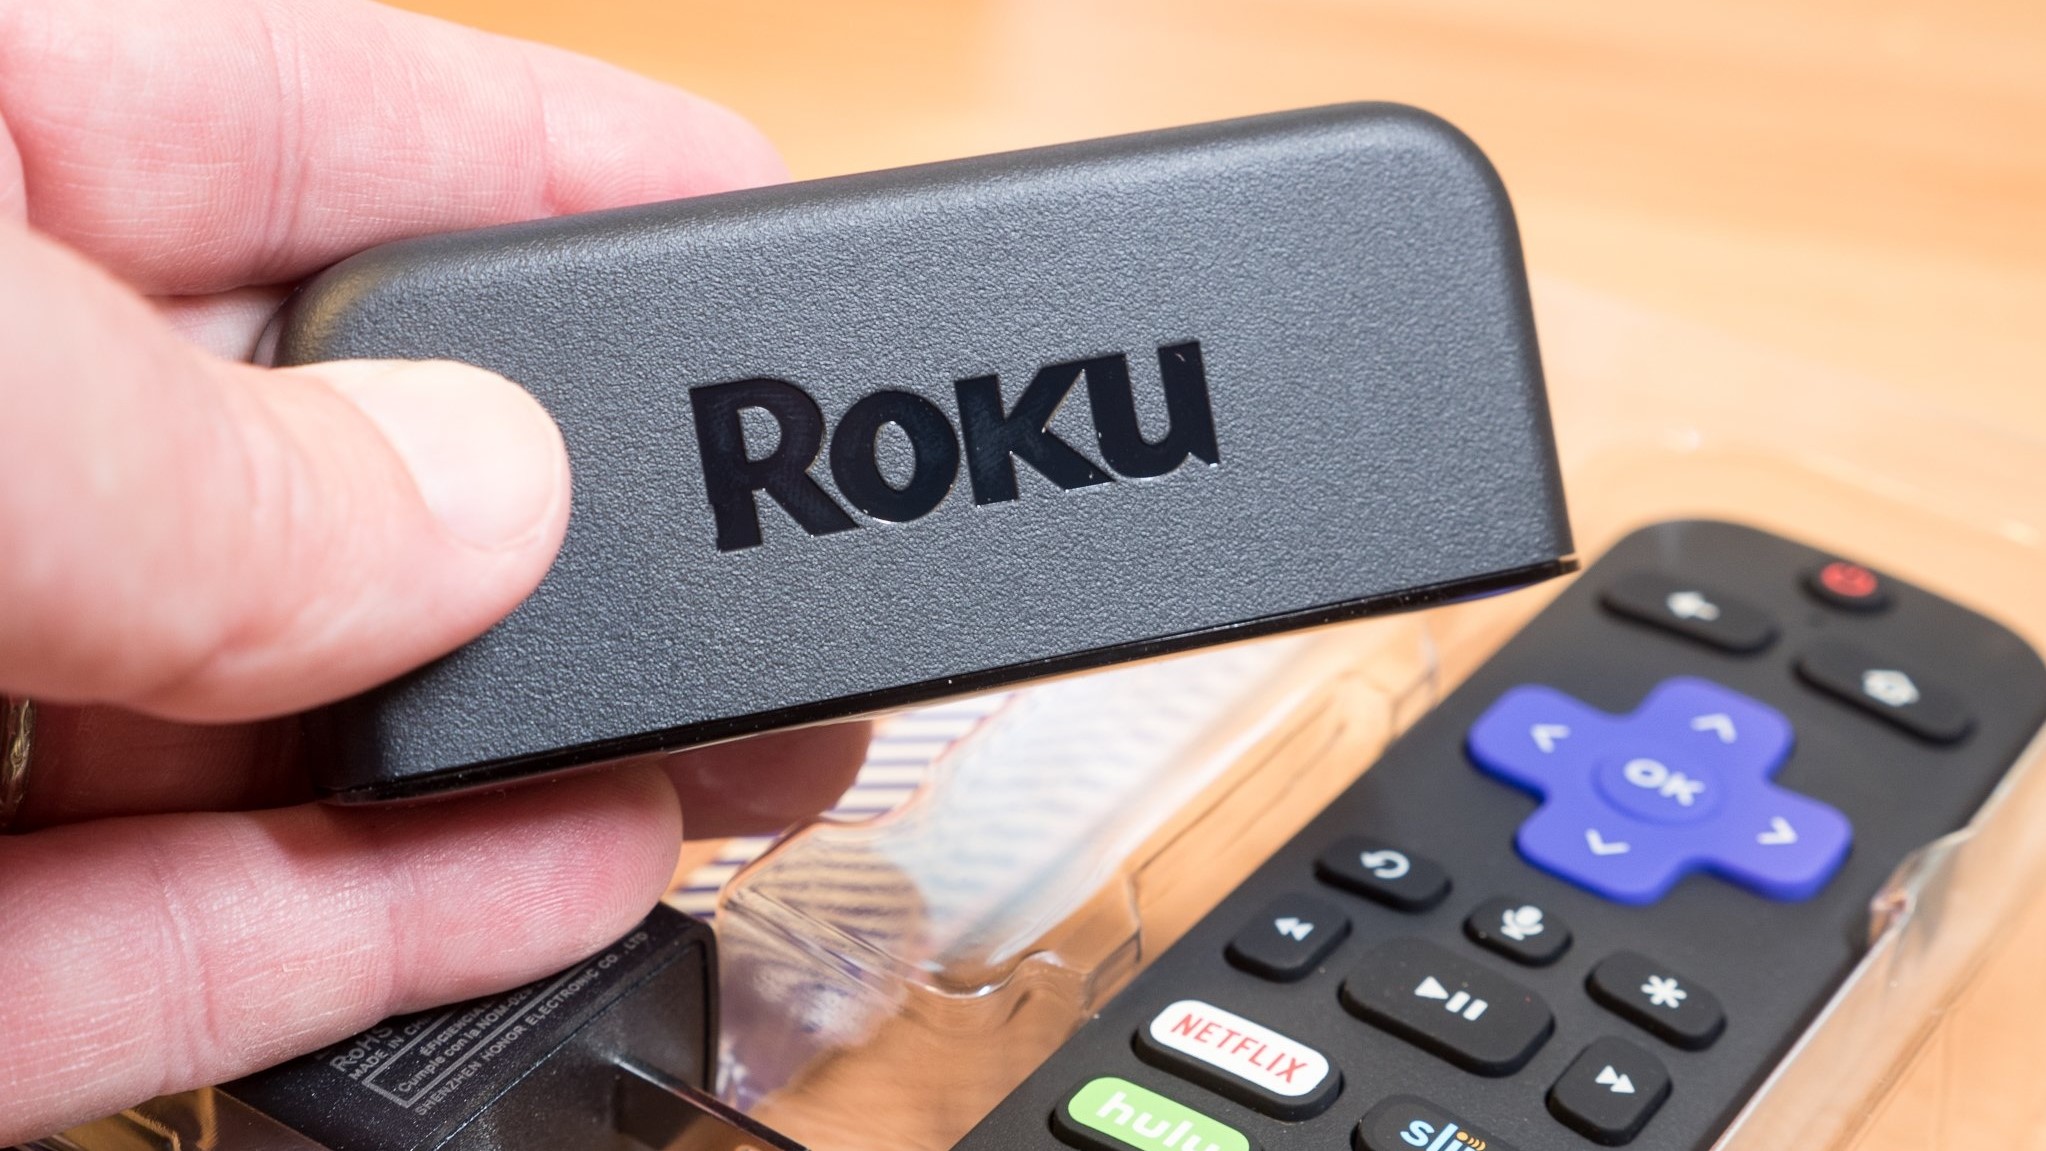 Roku has confirmed that more than half a million accounts have been hacked in a second credential stuffing incident.